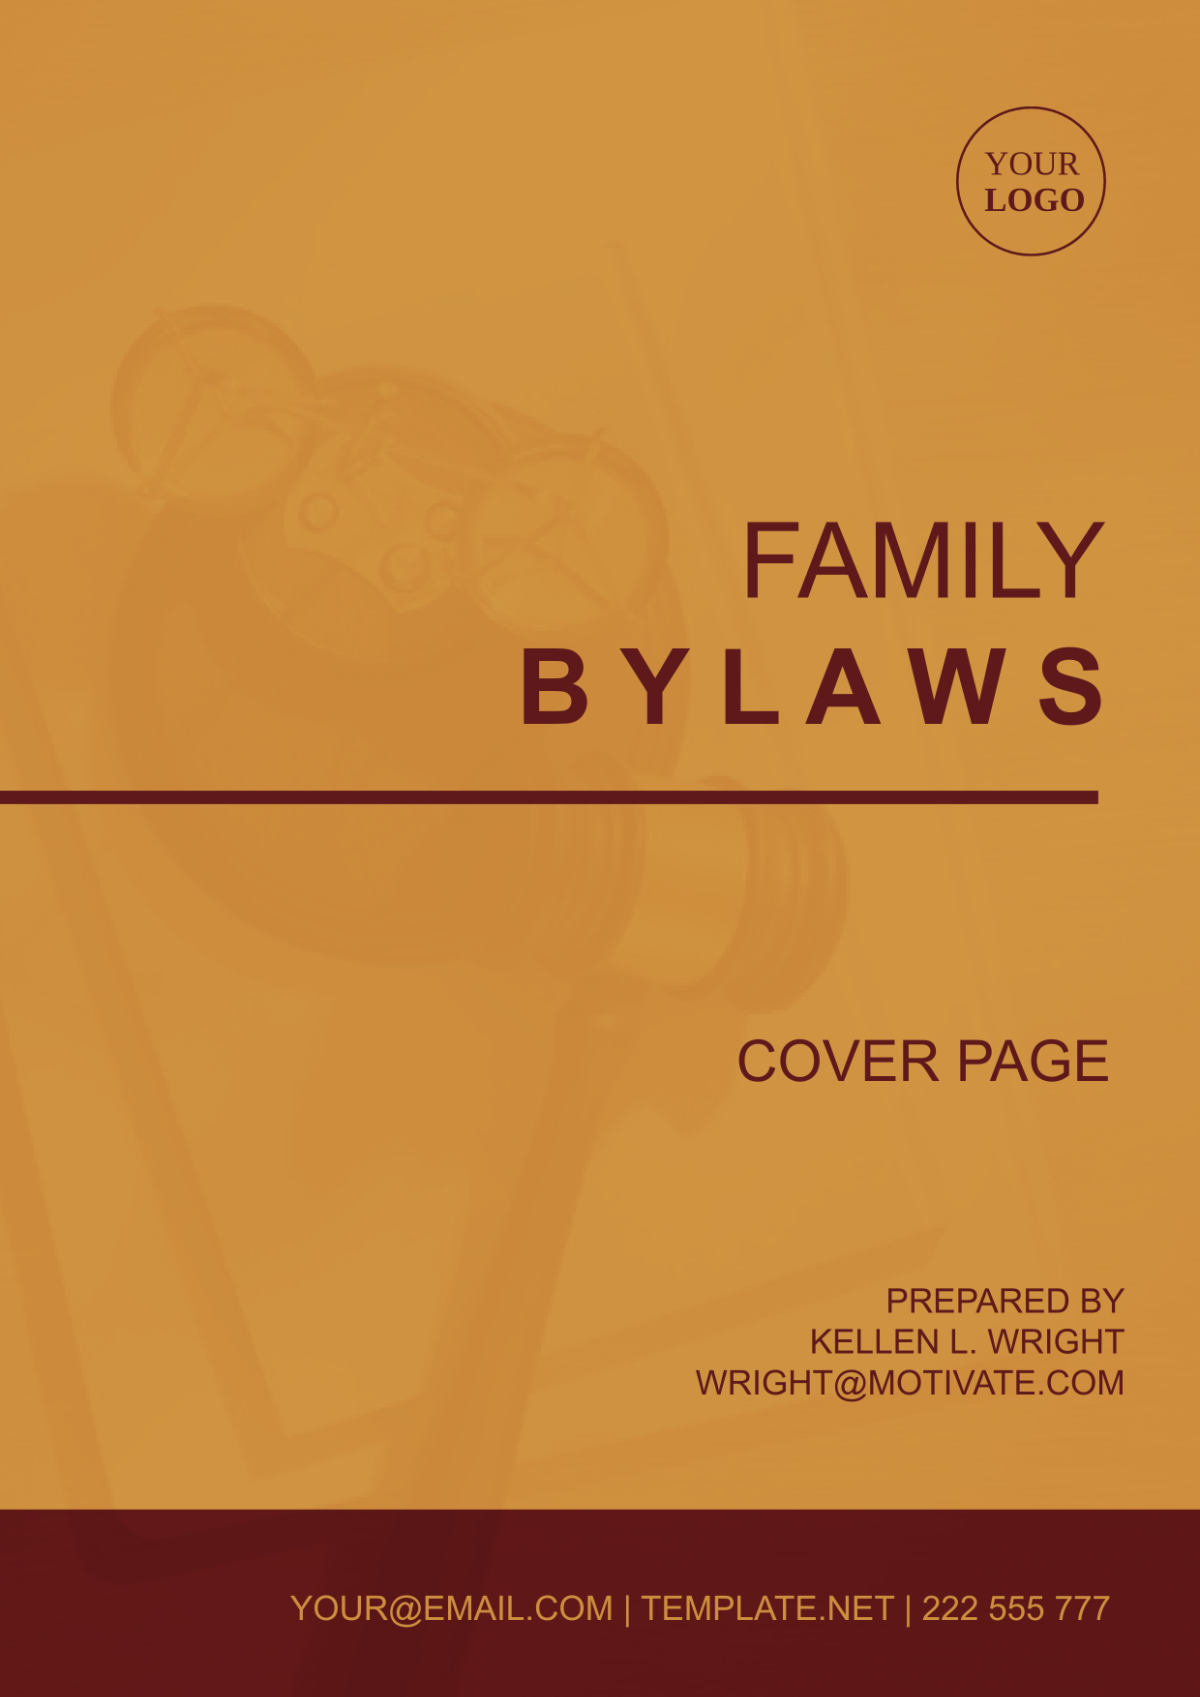 Family Bylaws Cover Page Template